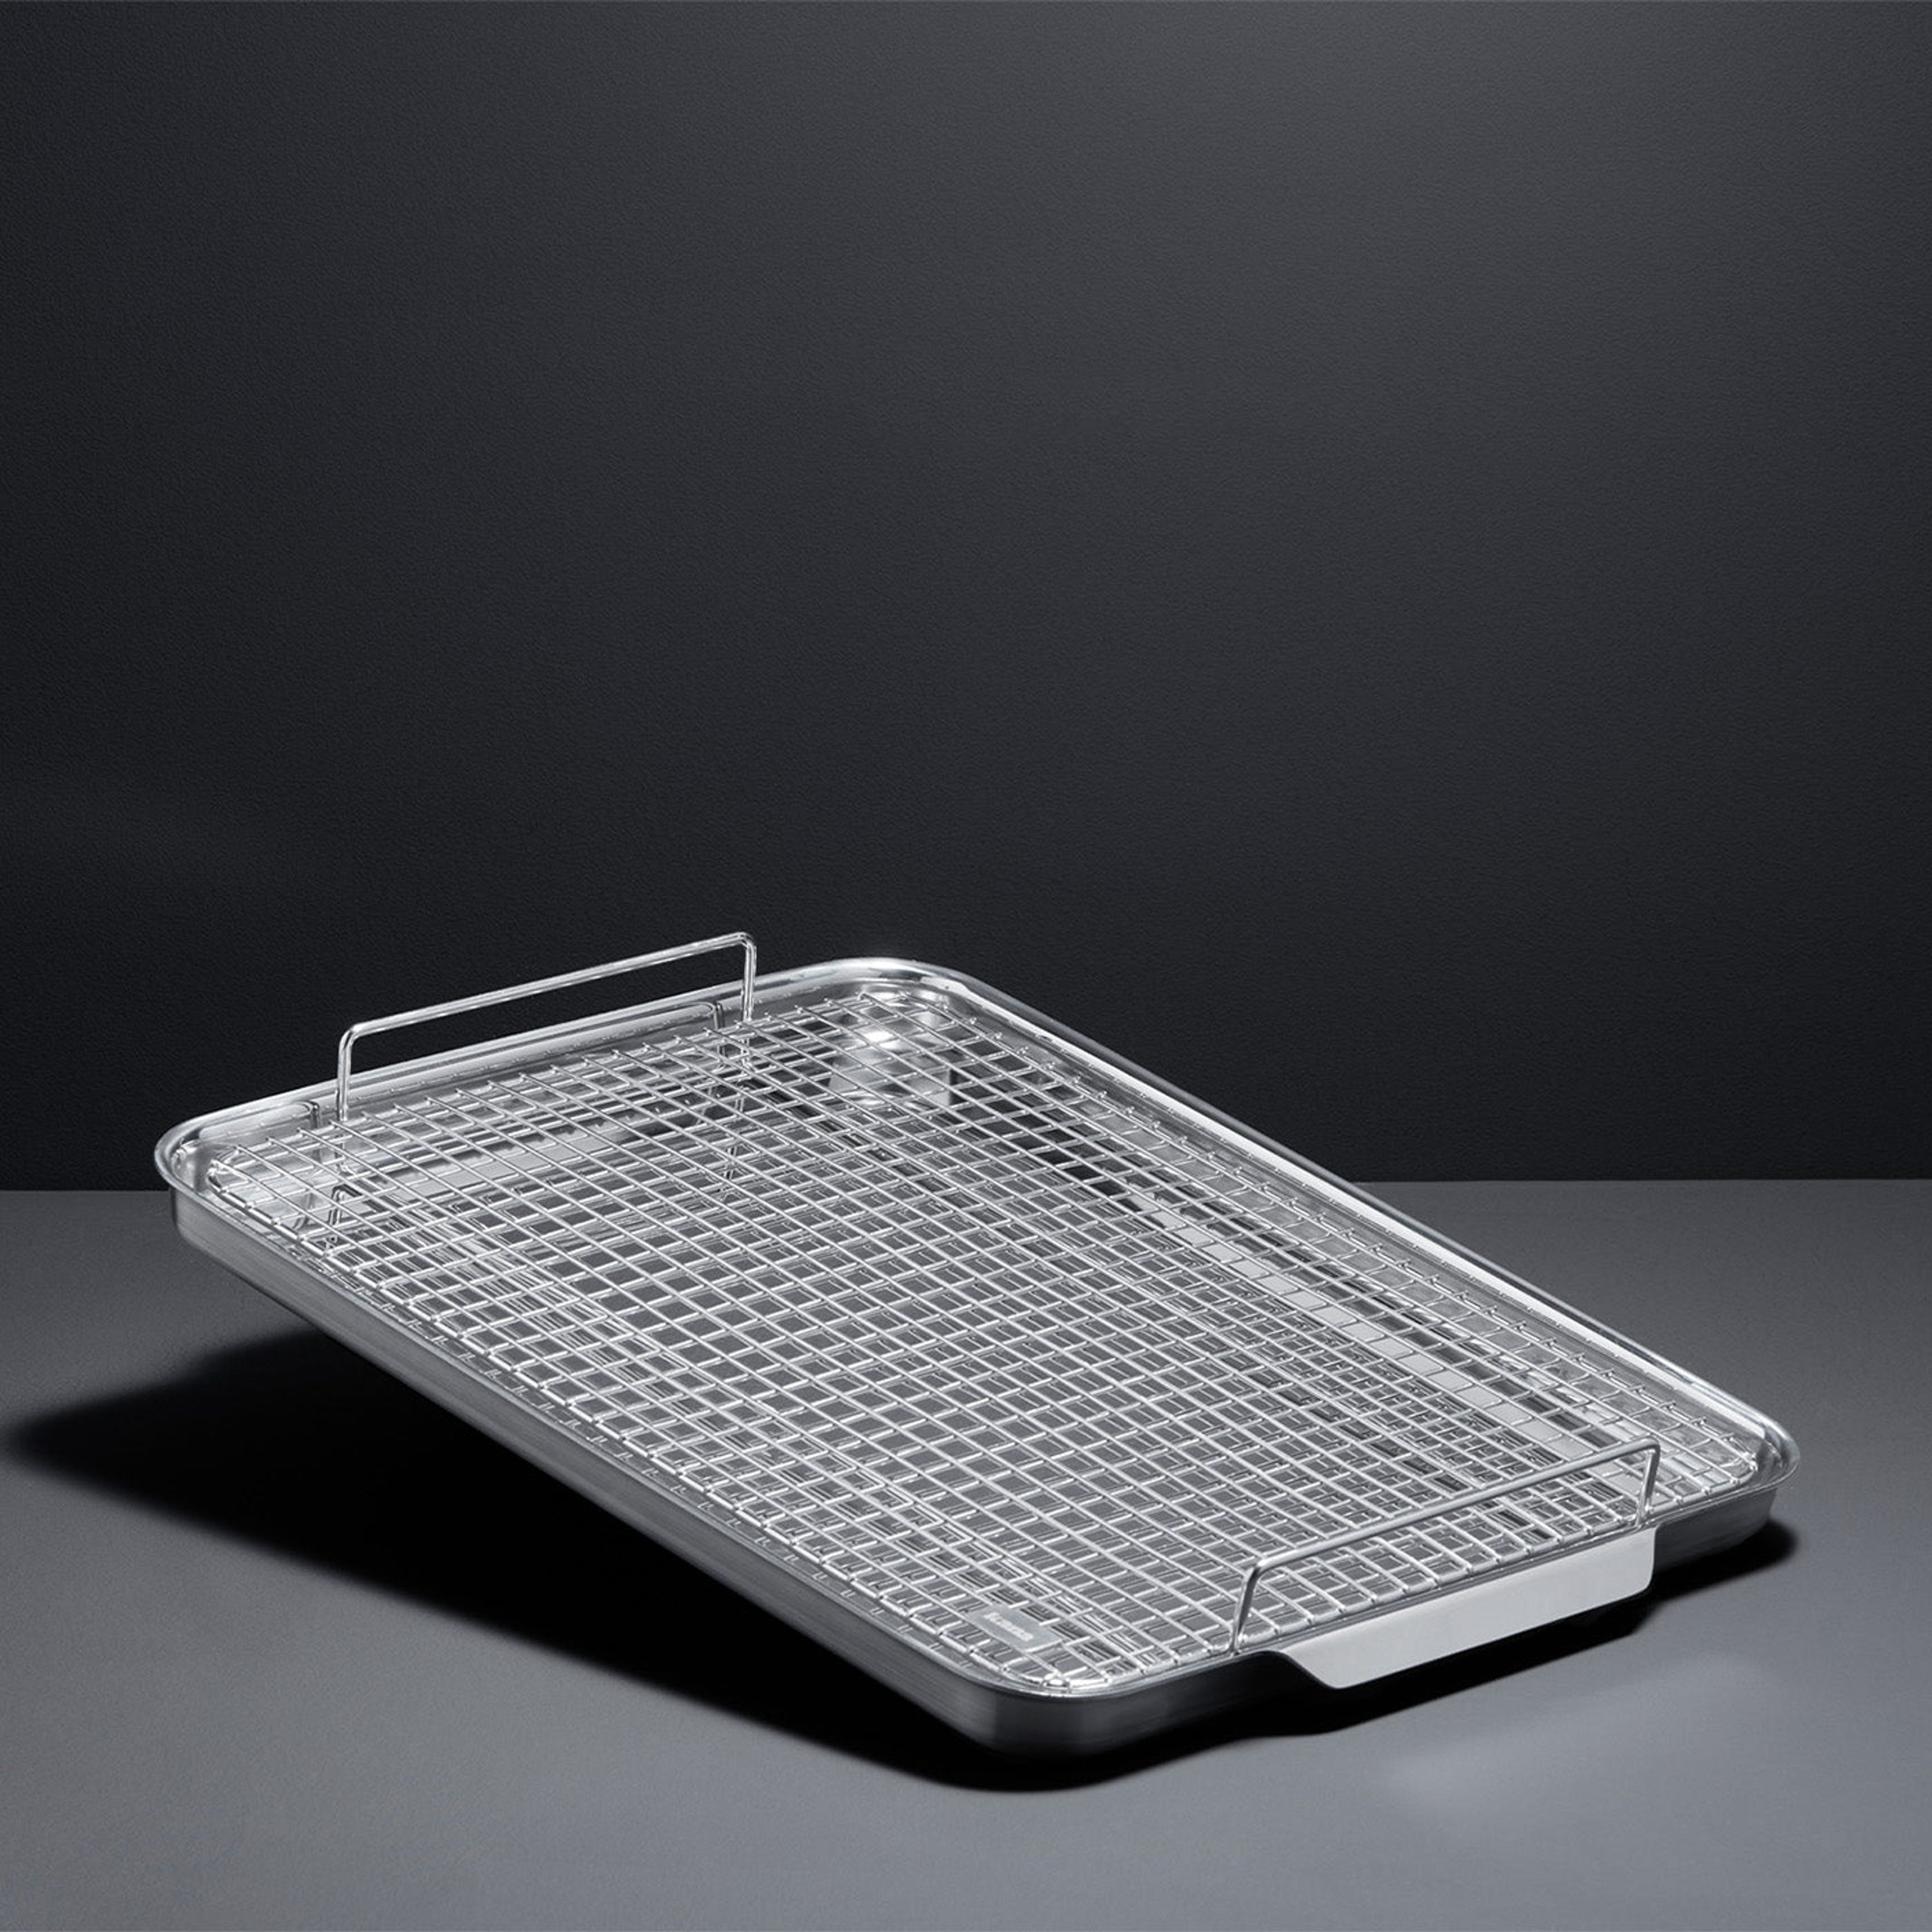 Stainless Steel Half Sheet Pan - Oven & BBQ